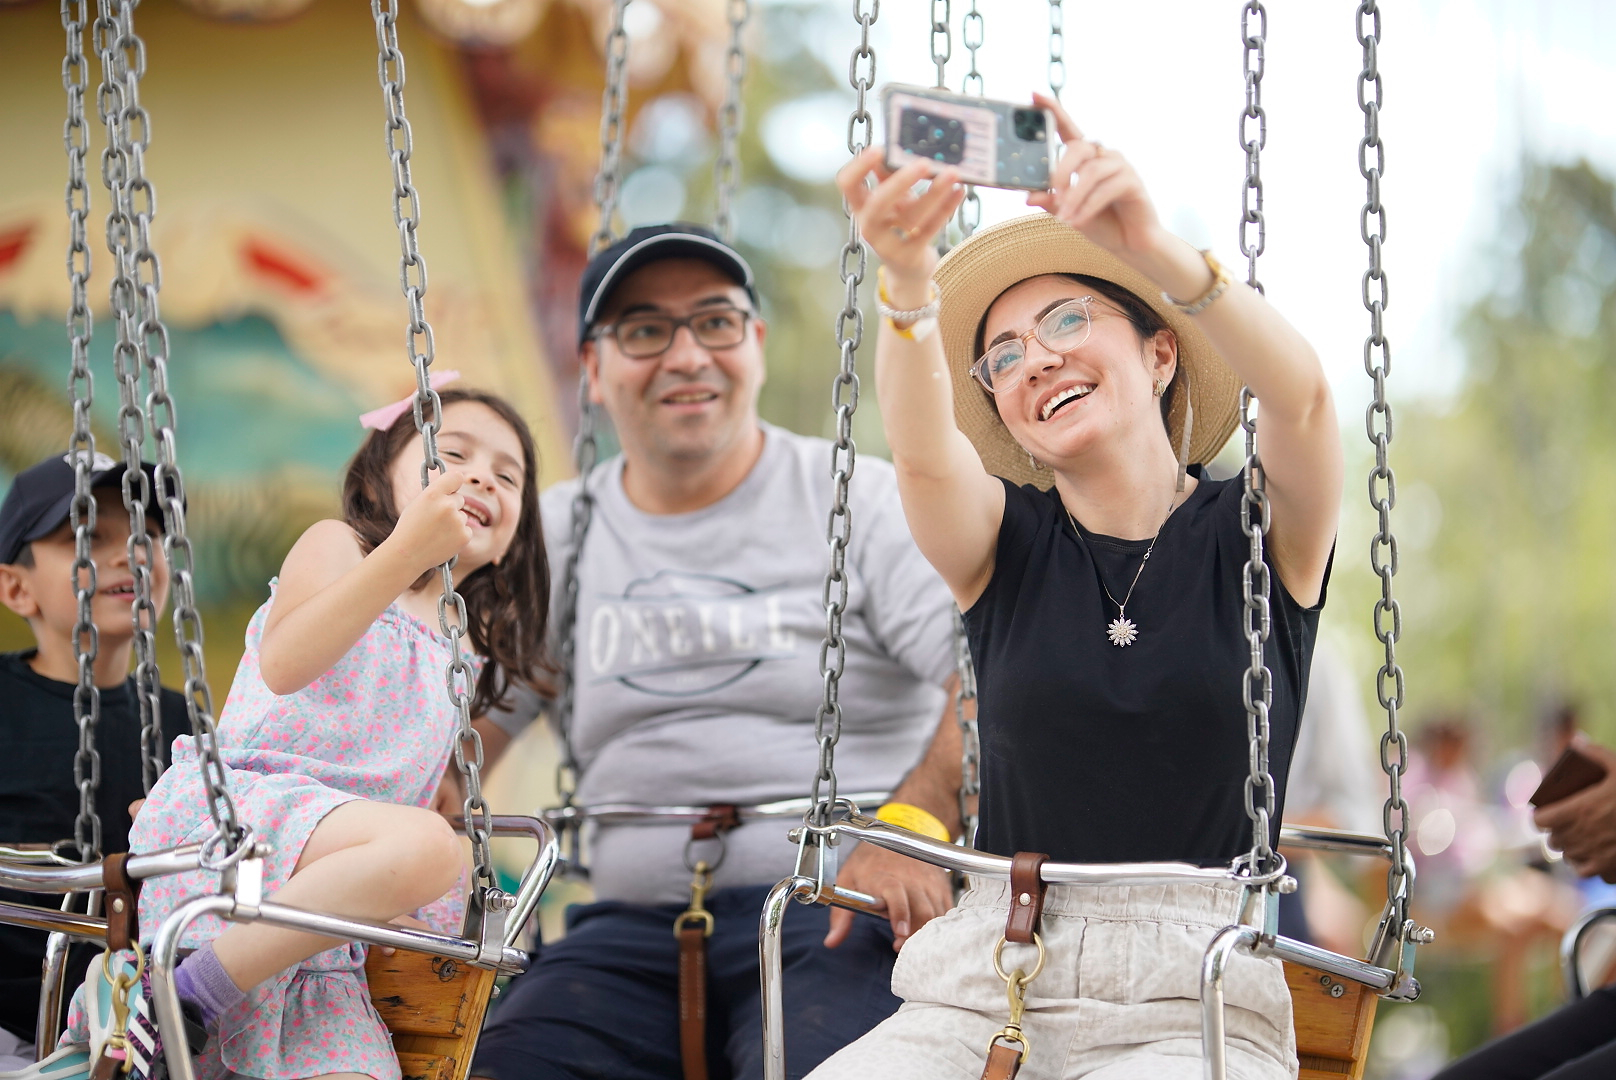 Family takes a selfie on the dangler swings at Heritage Park's Historical Village in Calgary